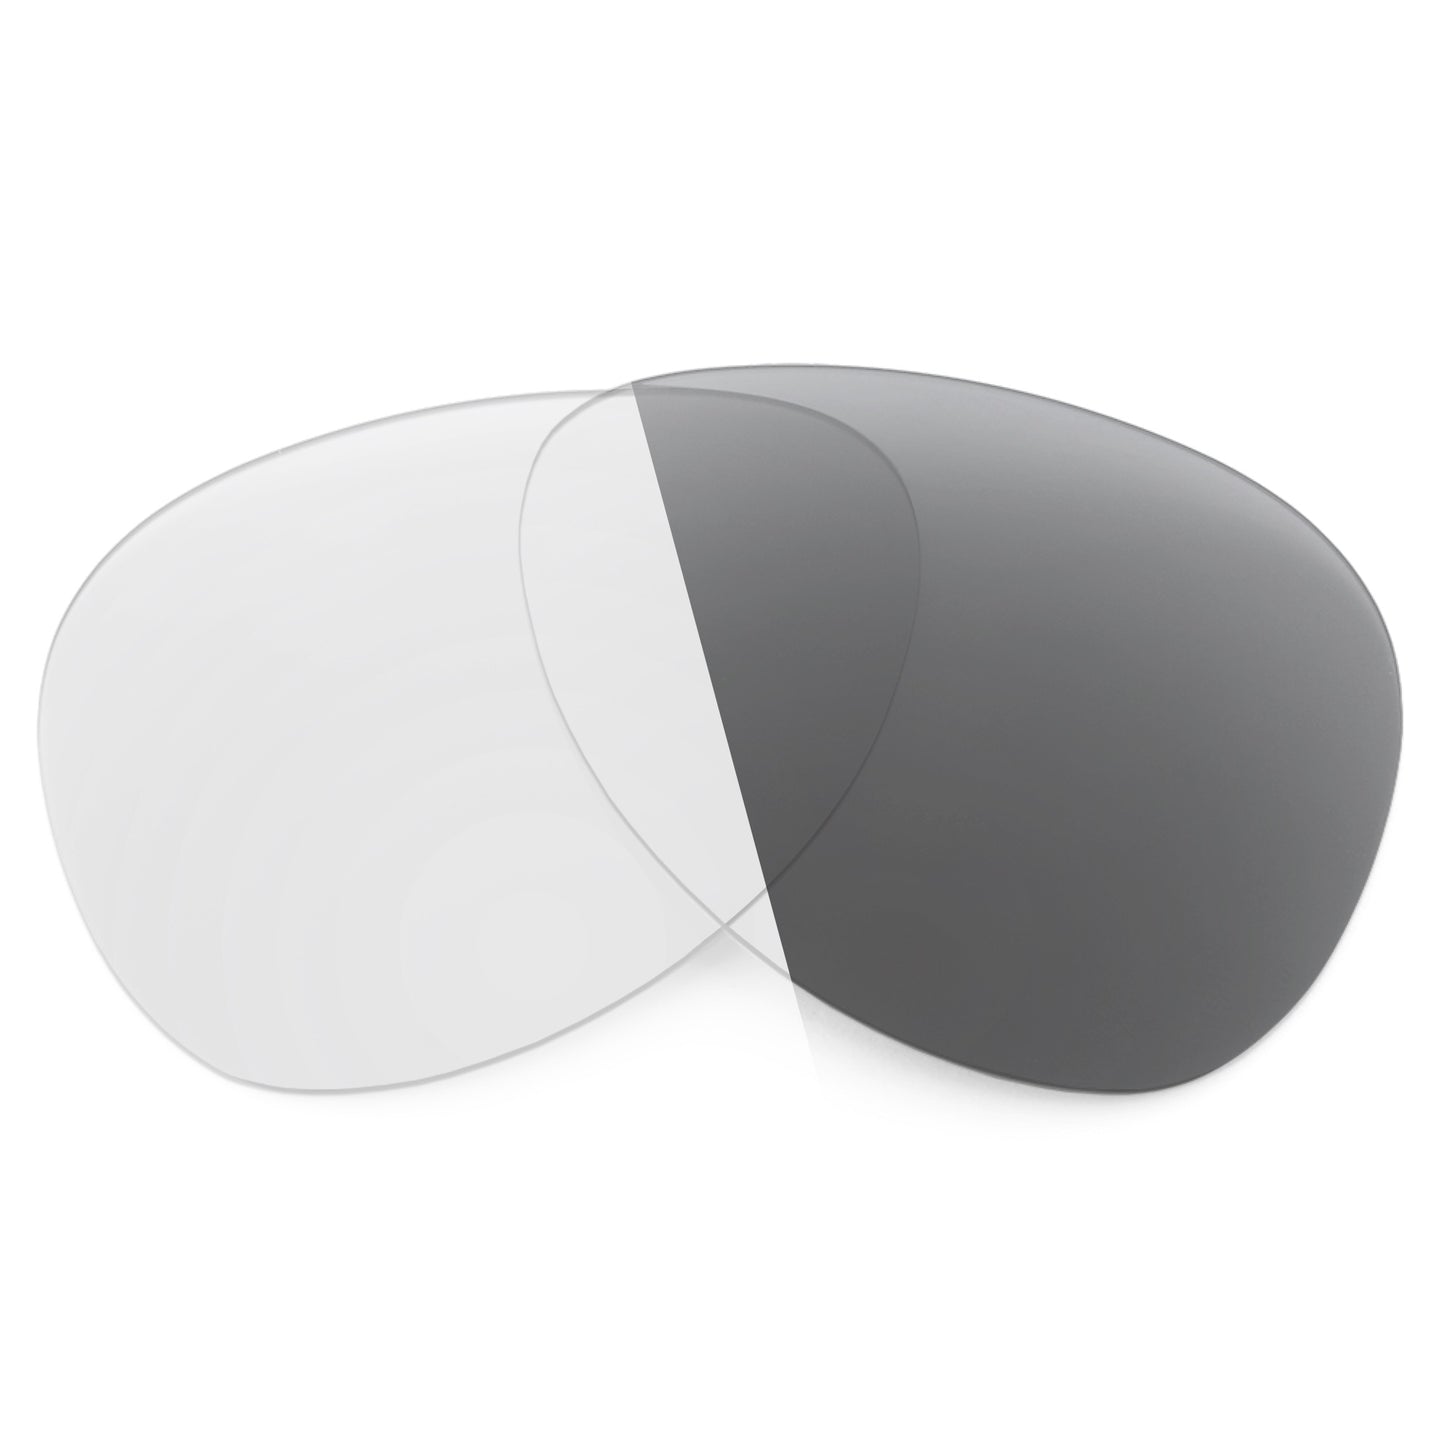 Revant replacement lenses for Ray-Ban RB4298 57mm Non-Polarized Adapt Gray Photochromic